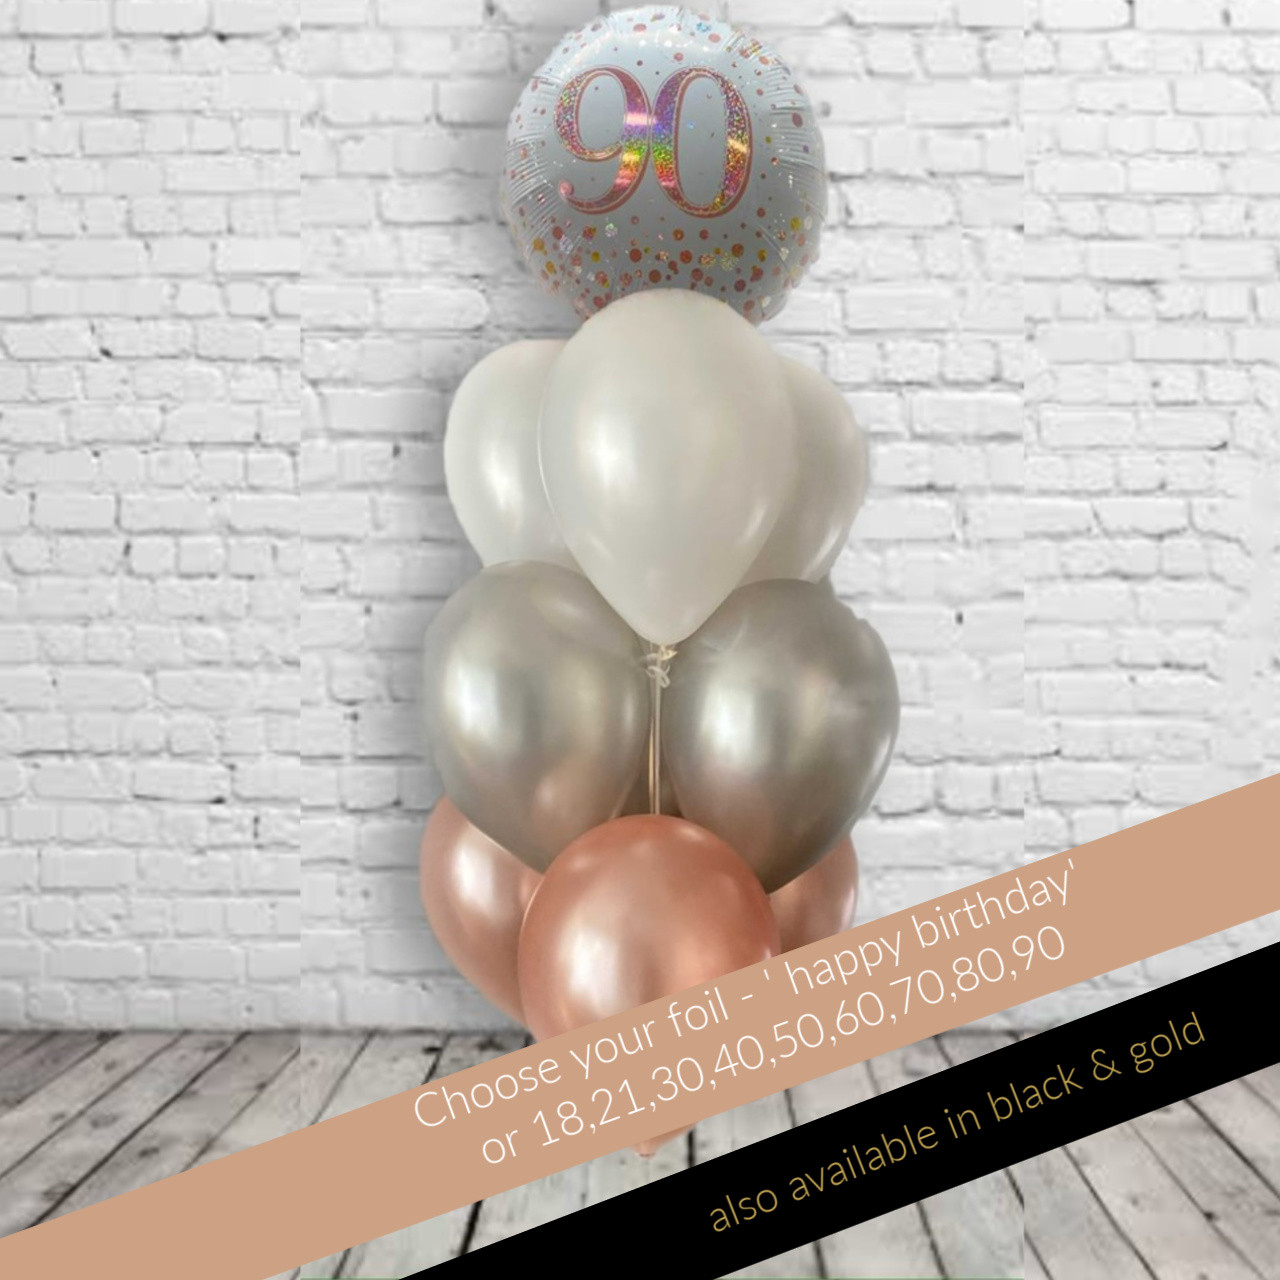 Sparkling Balloon Bouquet with foil plus 9 lated hi float to last includ weight